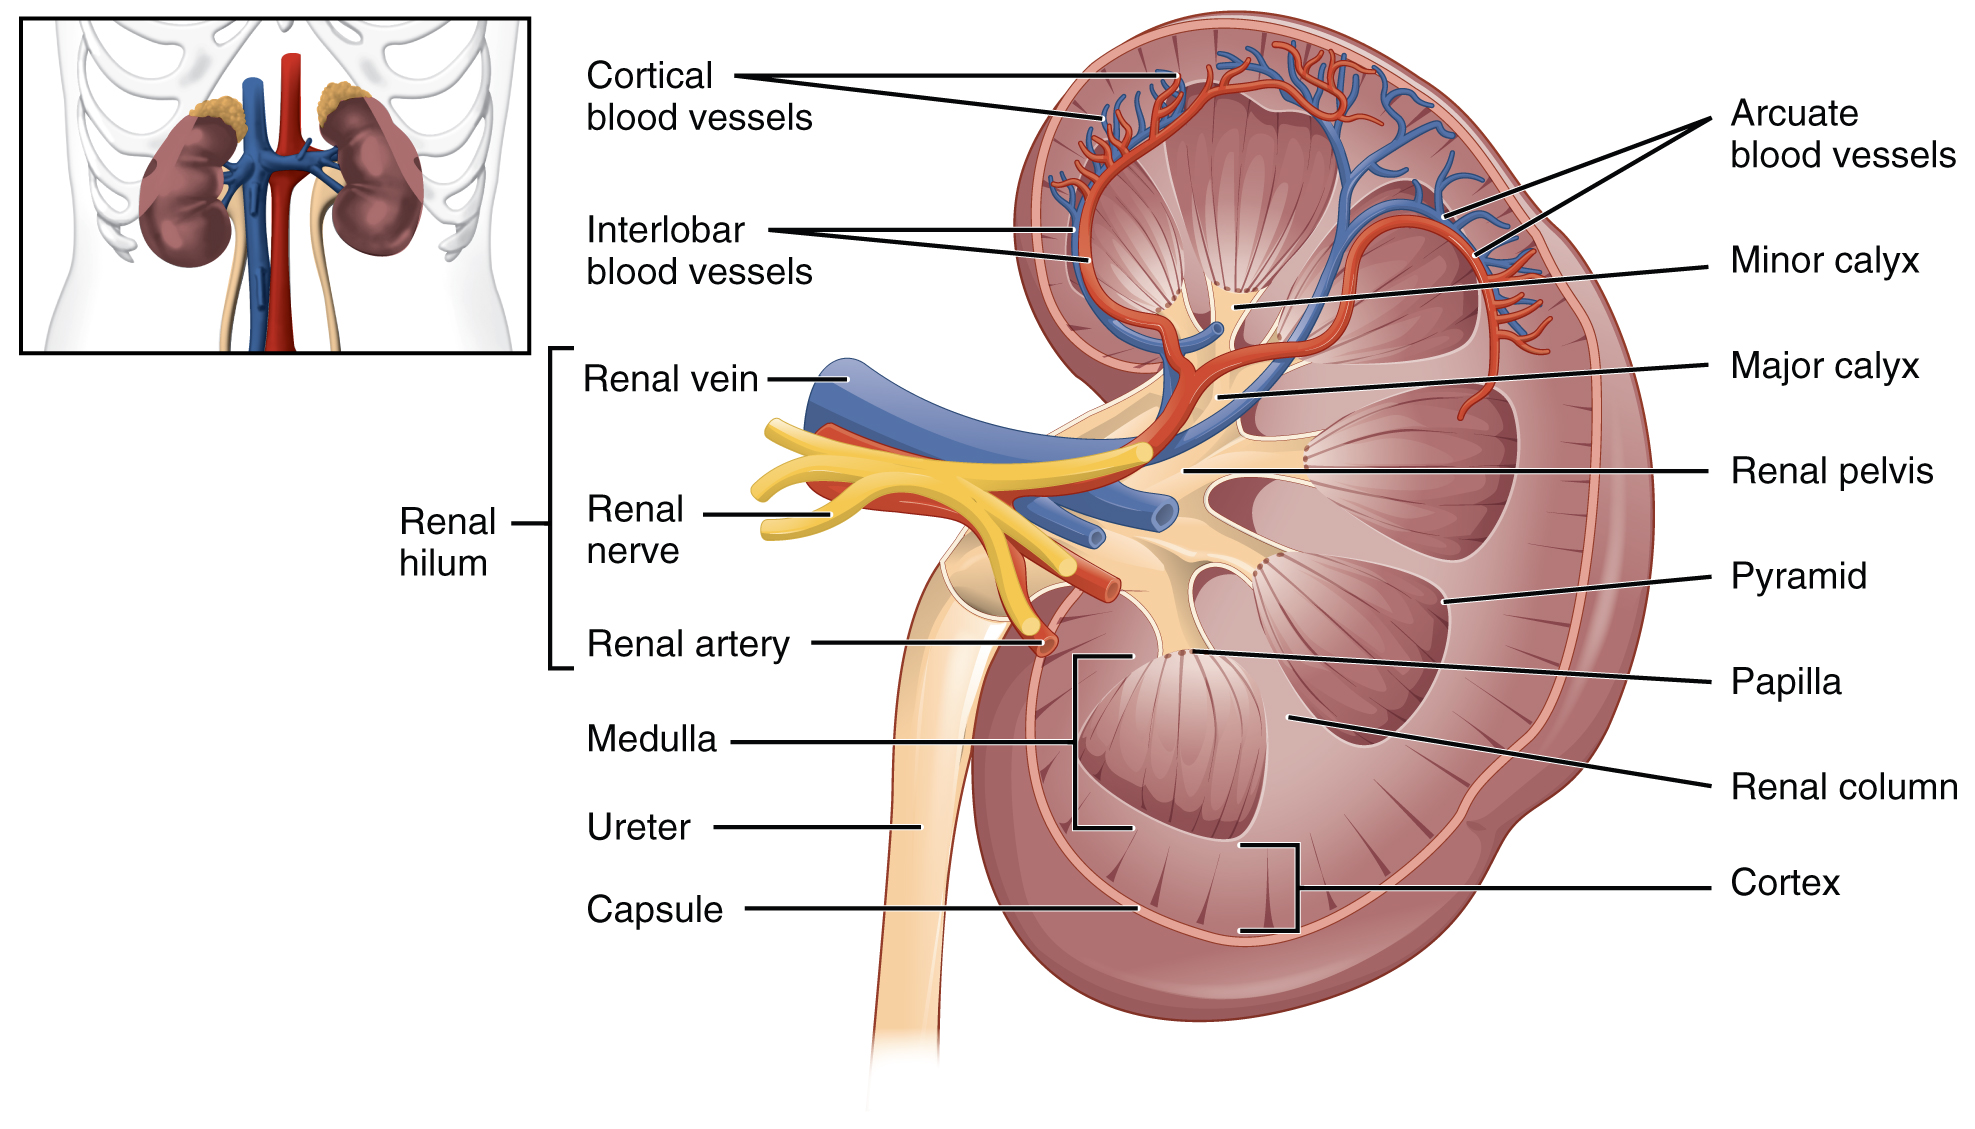 Left: The left panel of this figure shows the location of the kidneys in the abdomen. The right panel shows the cross section of the kidney.